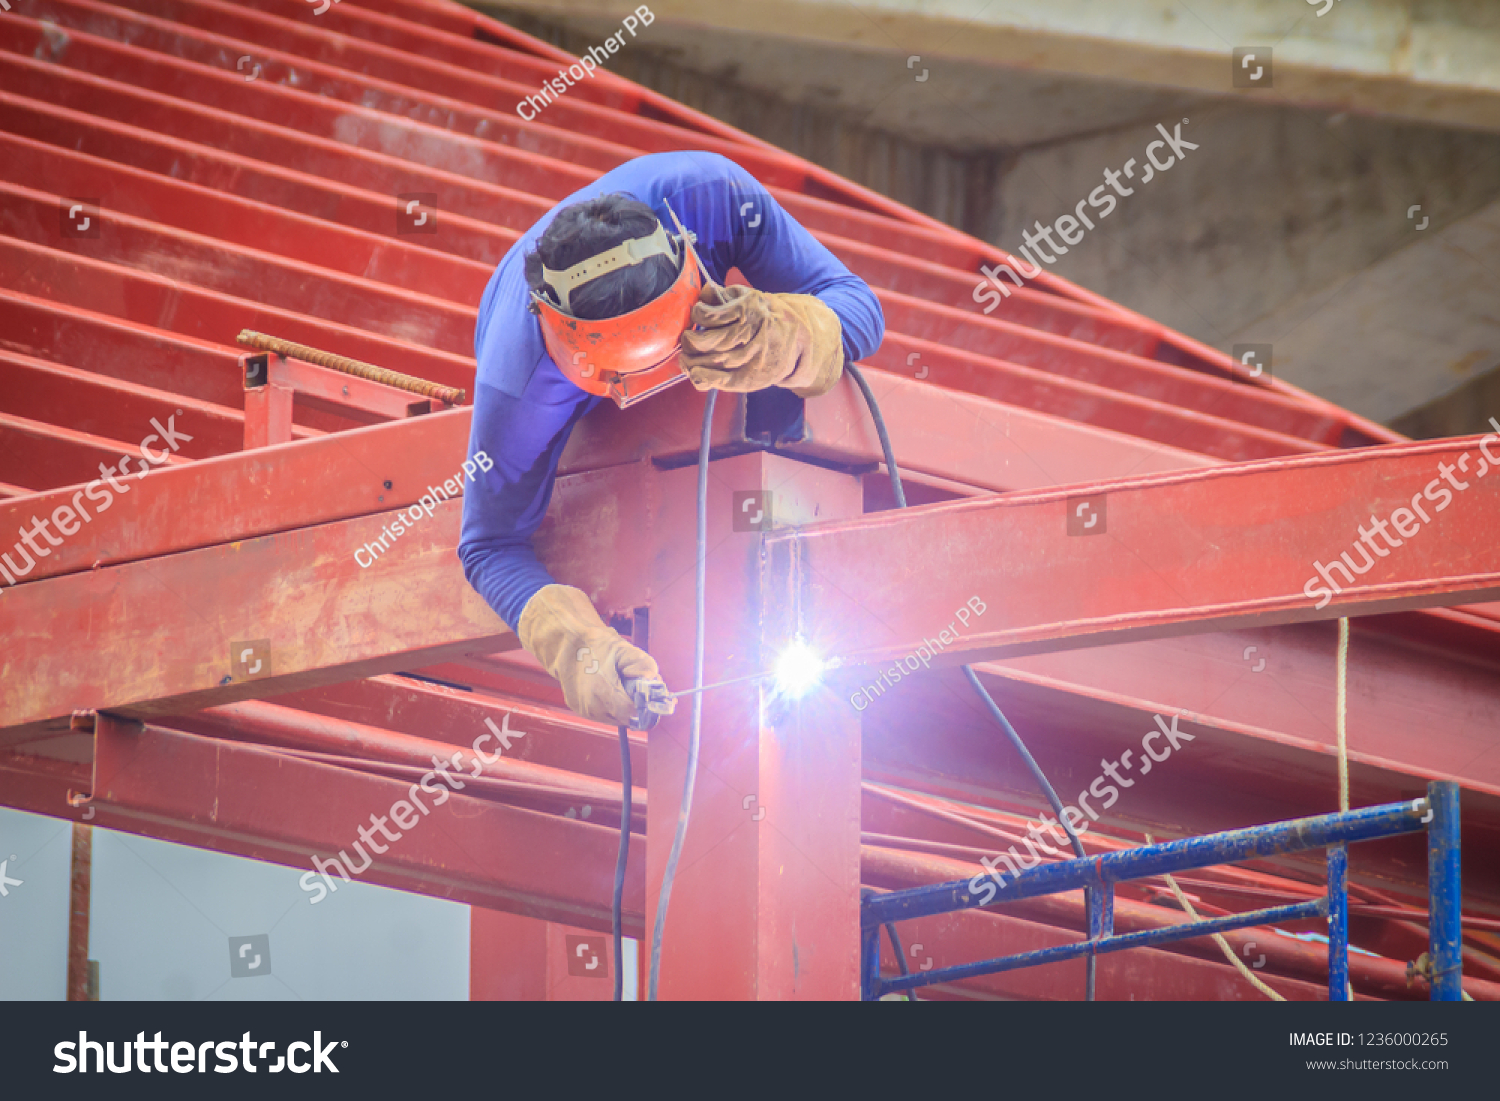 Risky welder while climbing and welding on top of the steel roof structure work at the building construction site. Skilled worker is welding on the high steel structure at the construction project. #1236000265